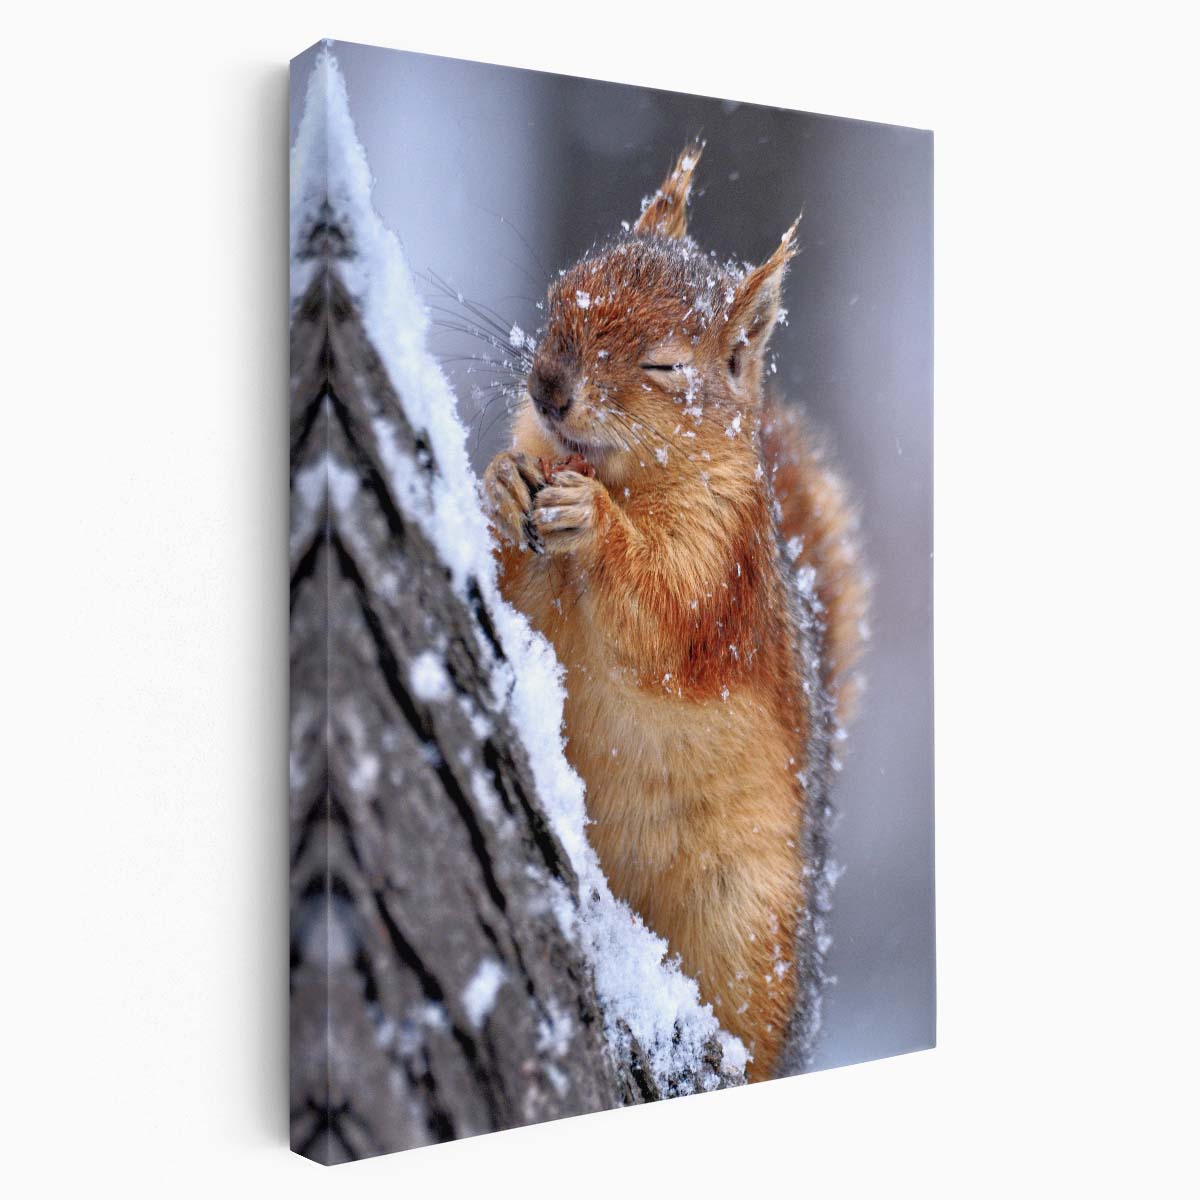 Winter Wildlife Photography Cute Squirrel Eating Acorn in Snowy Nature by Luxuriance Designs, made in USA